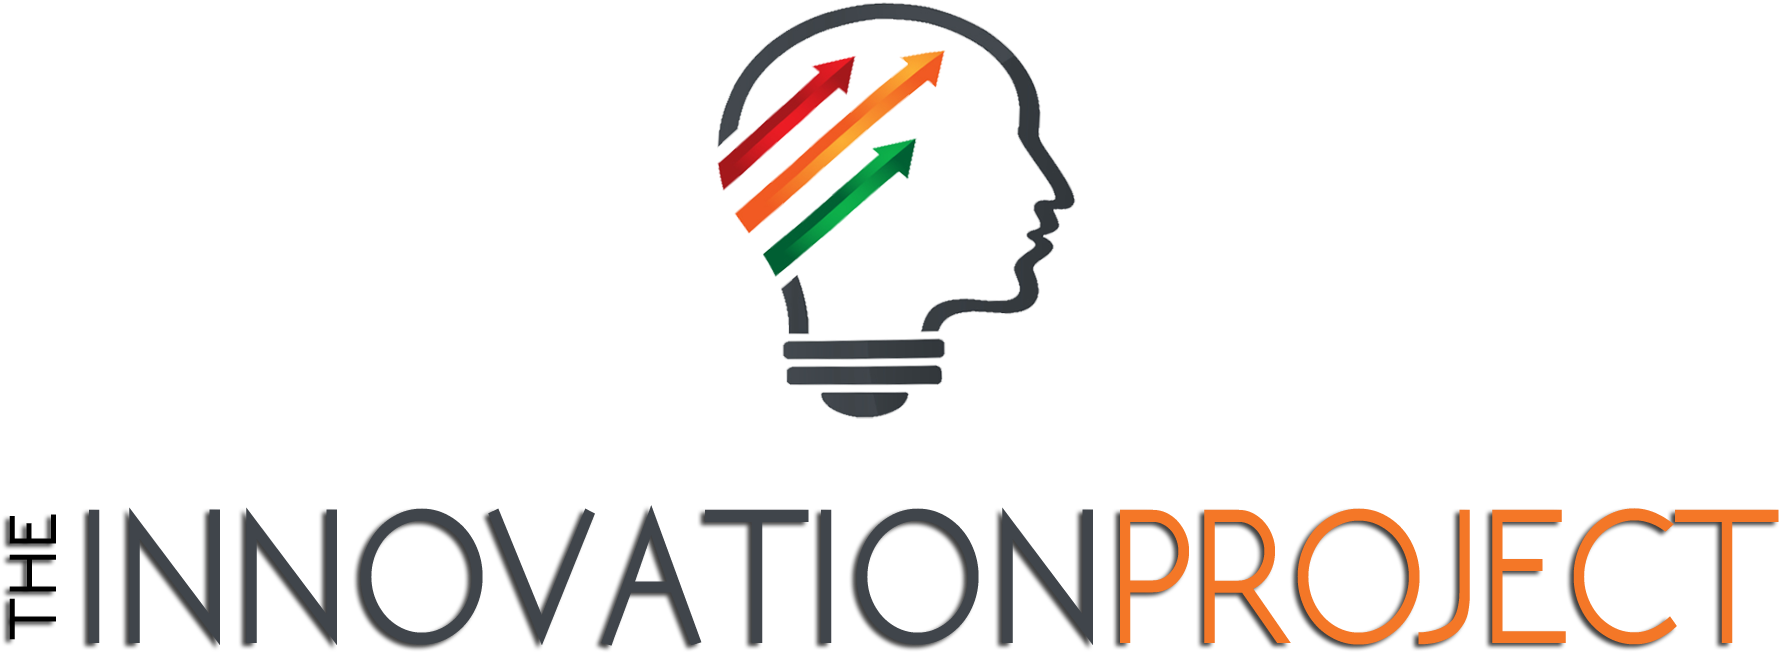 Innovation Project Logo PNG image